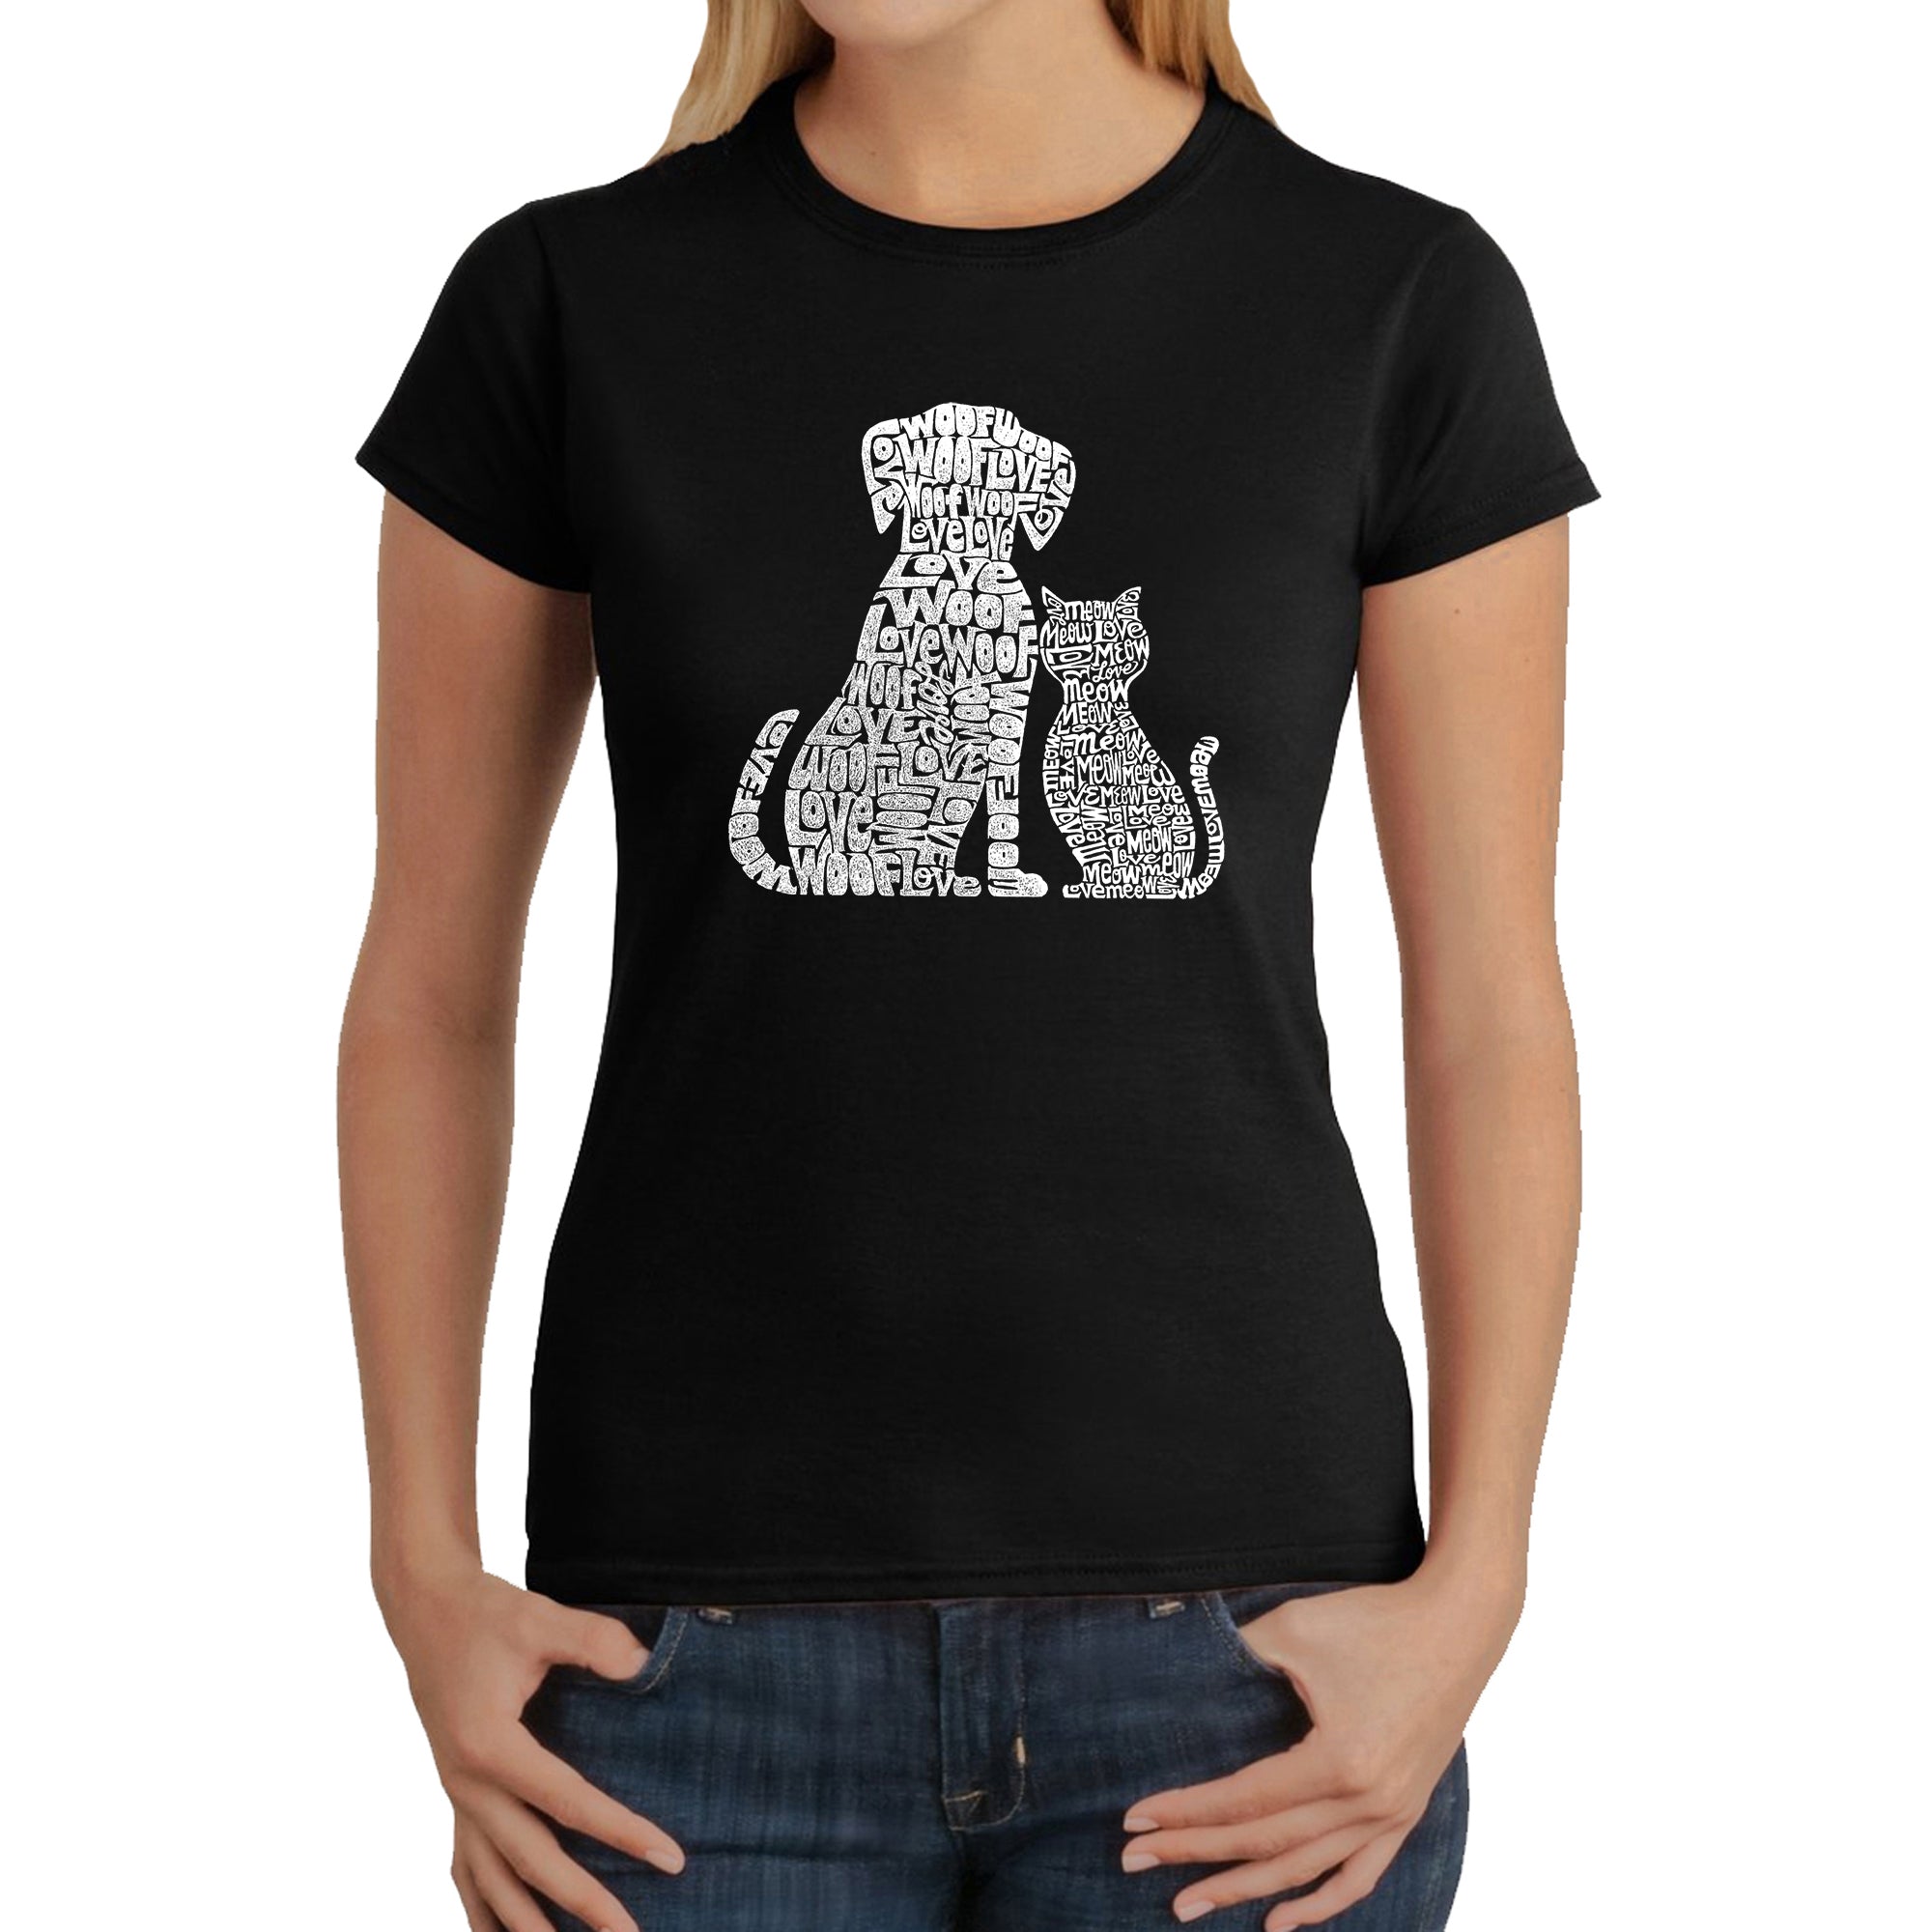 Dogs And Cats - Women's Word Art T-Shirt - Grey - Large